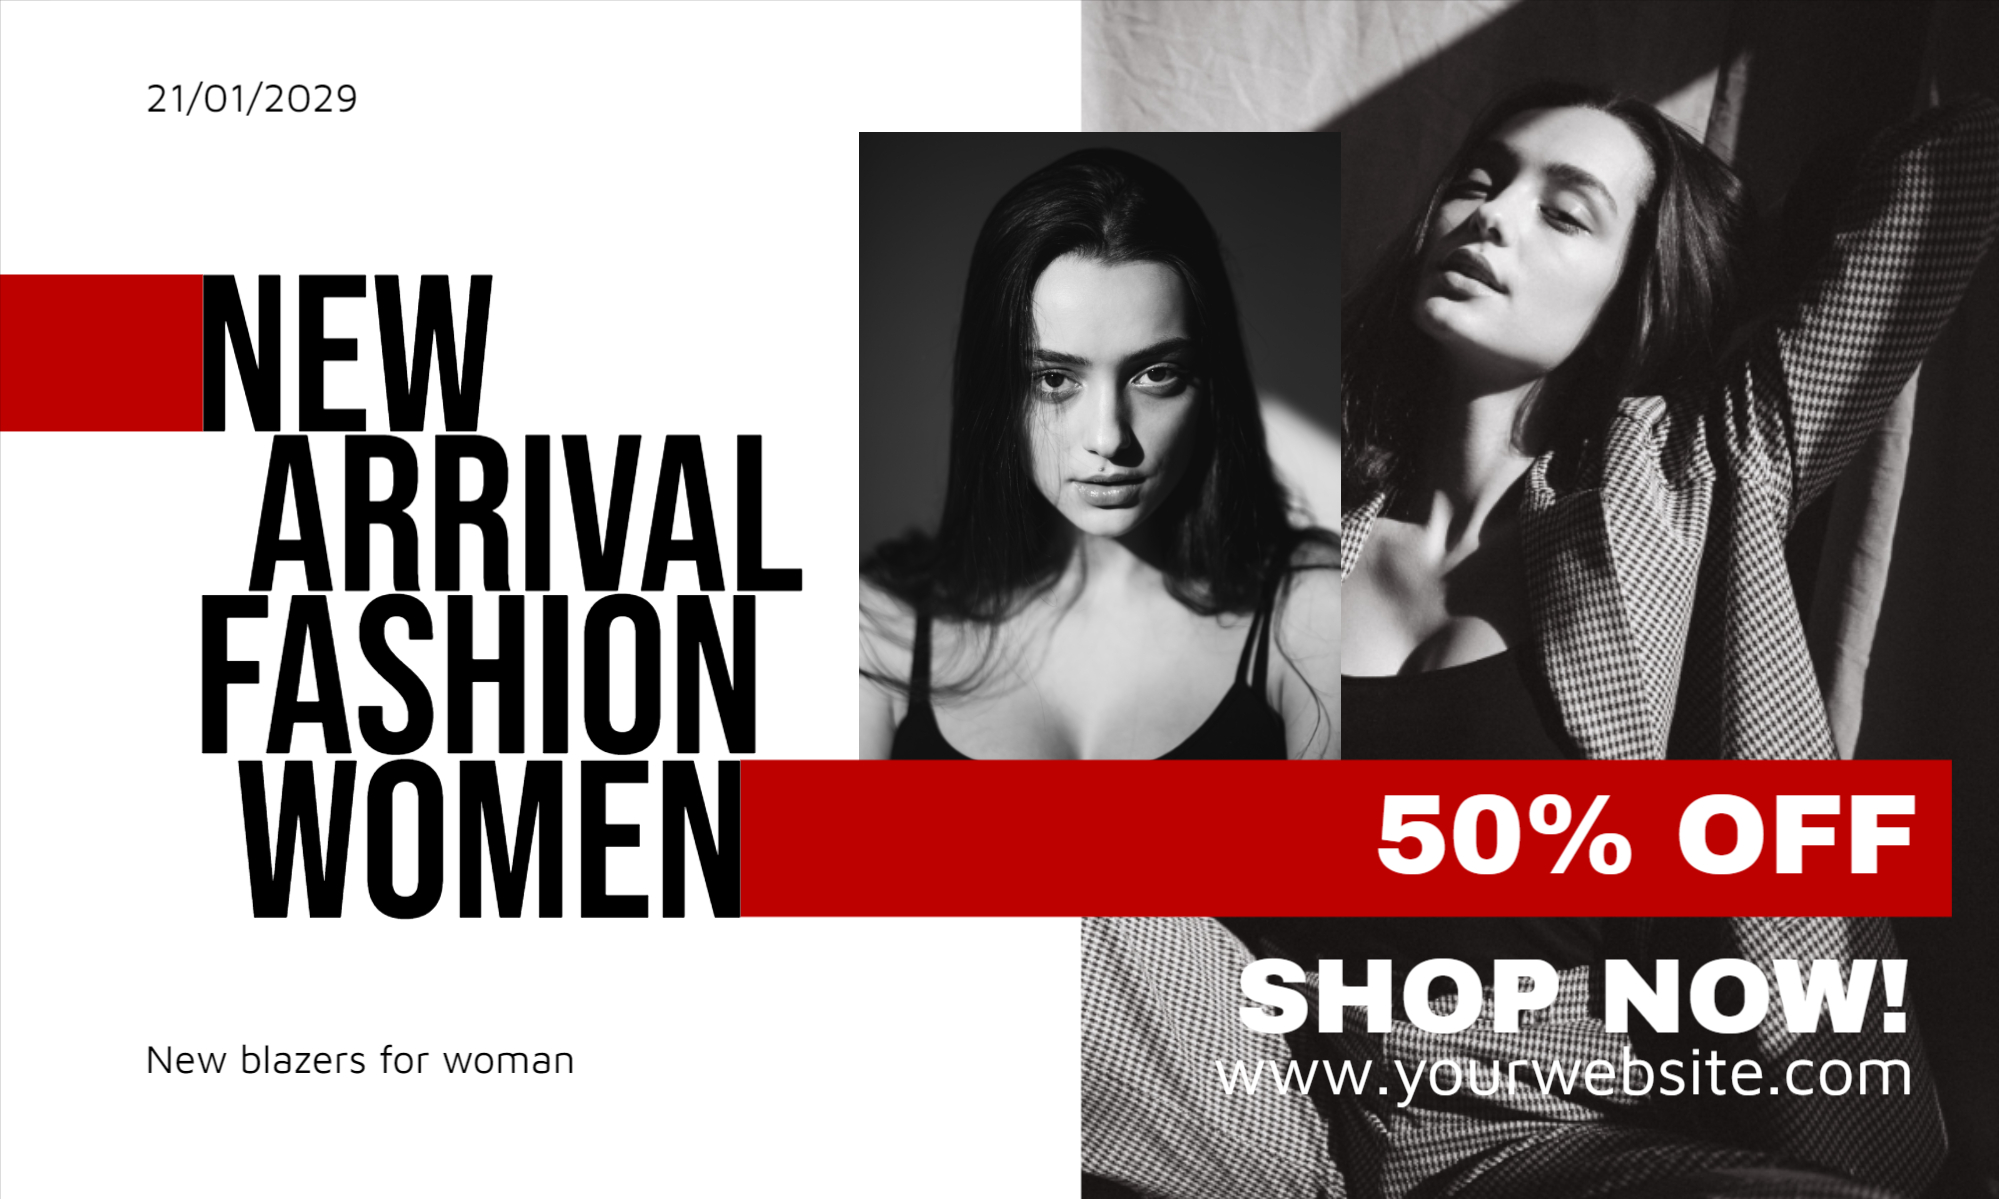  New Arrival Fashion Women banner design download for free